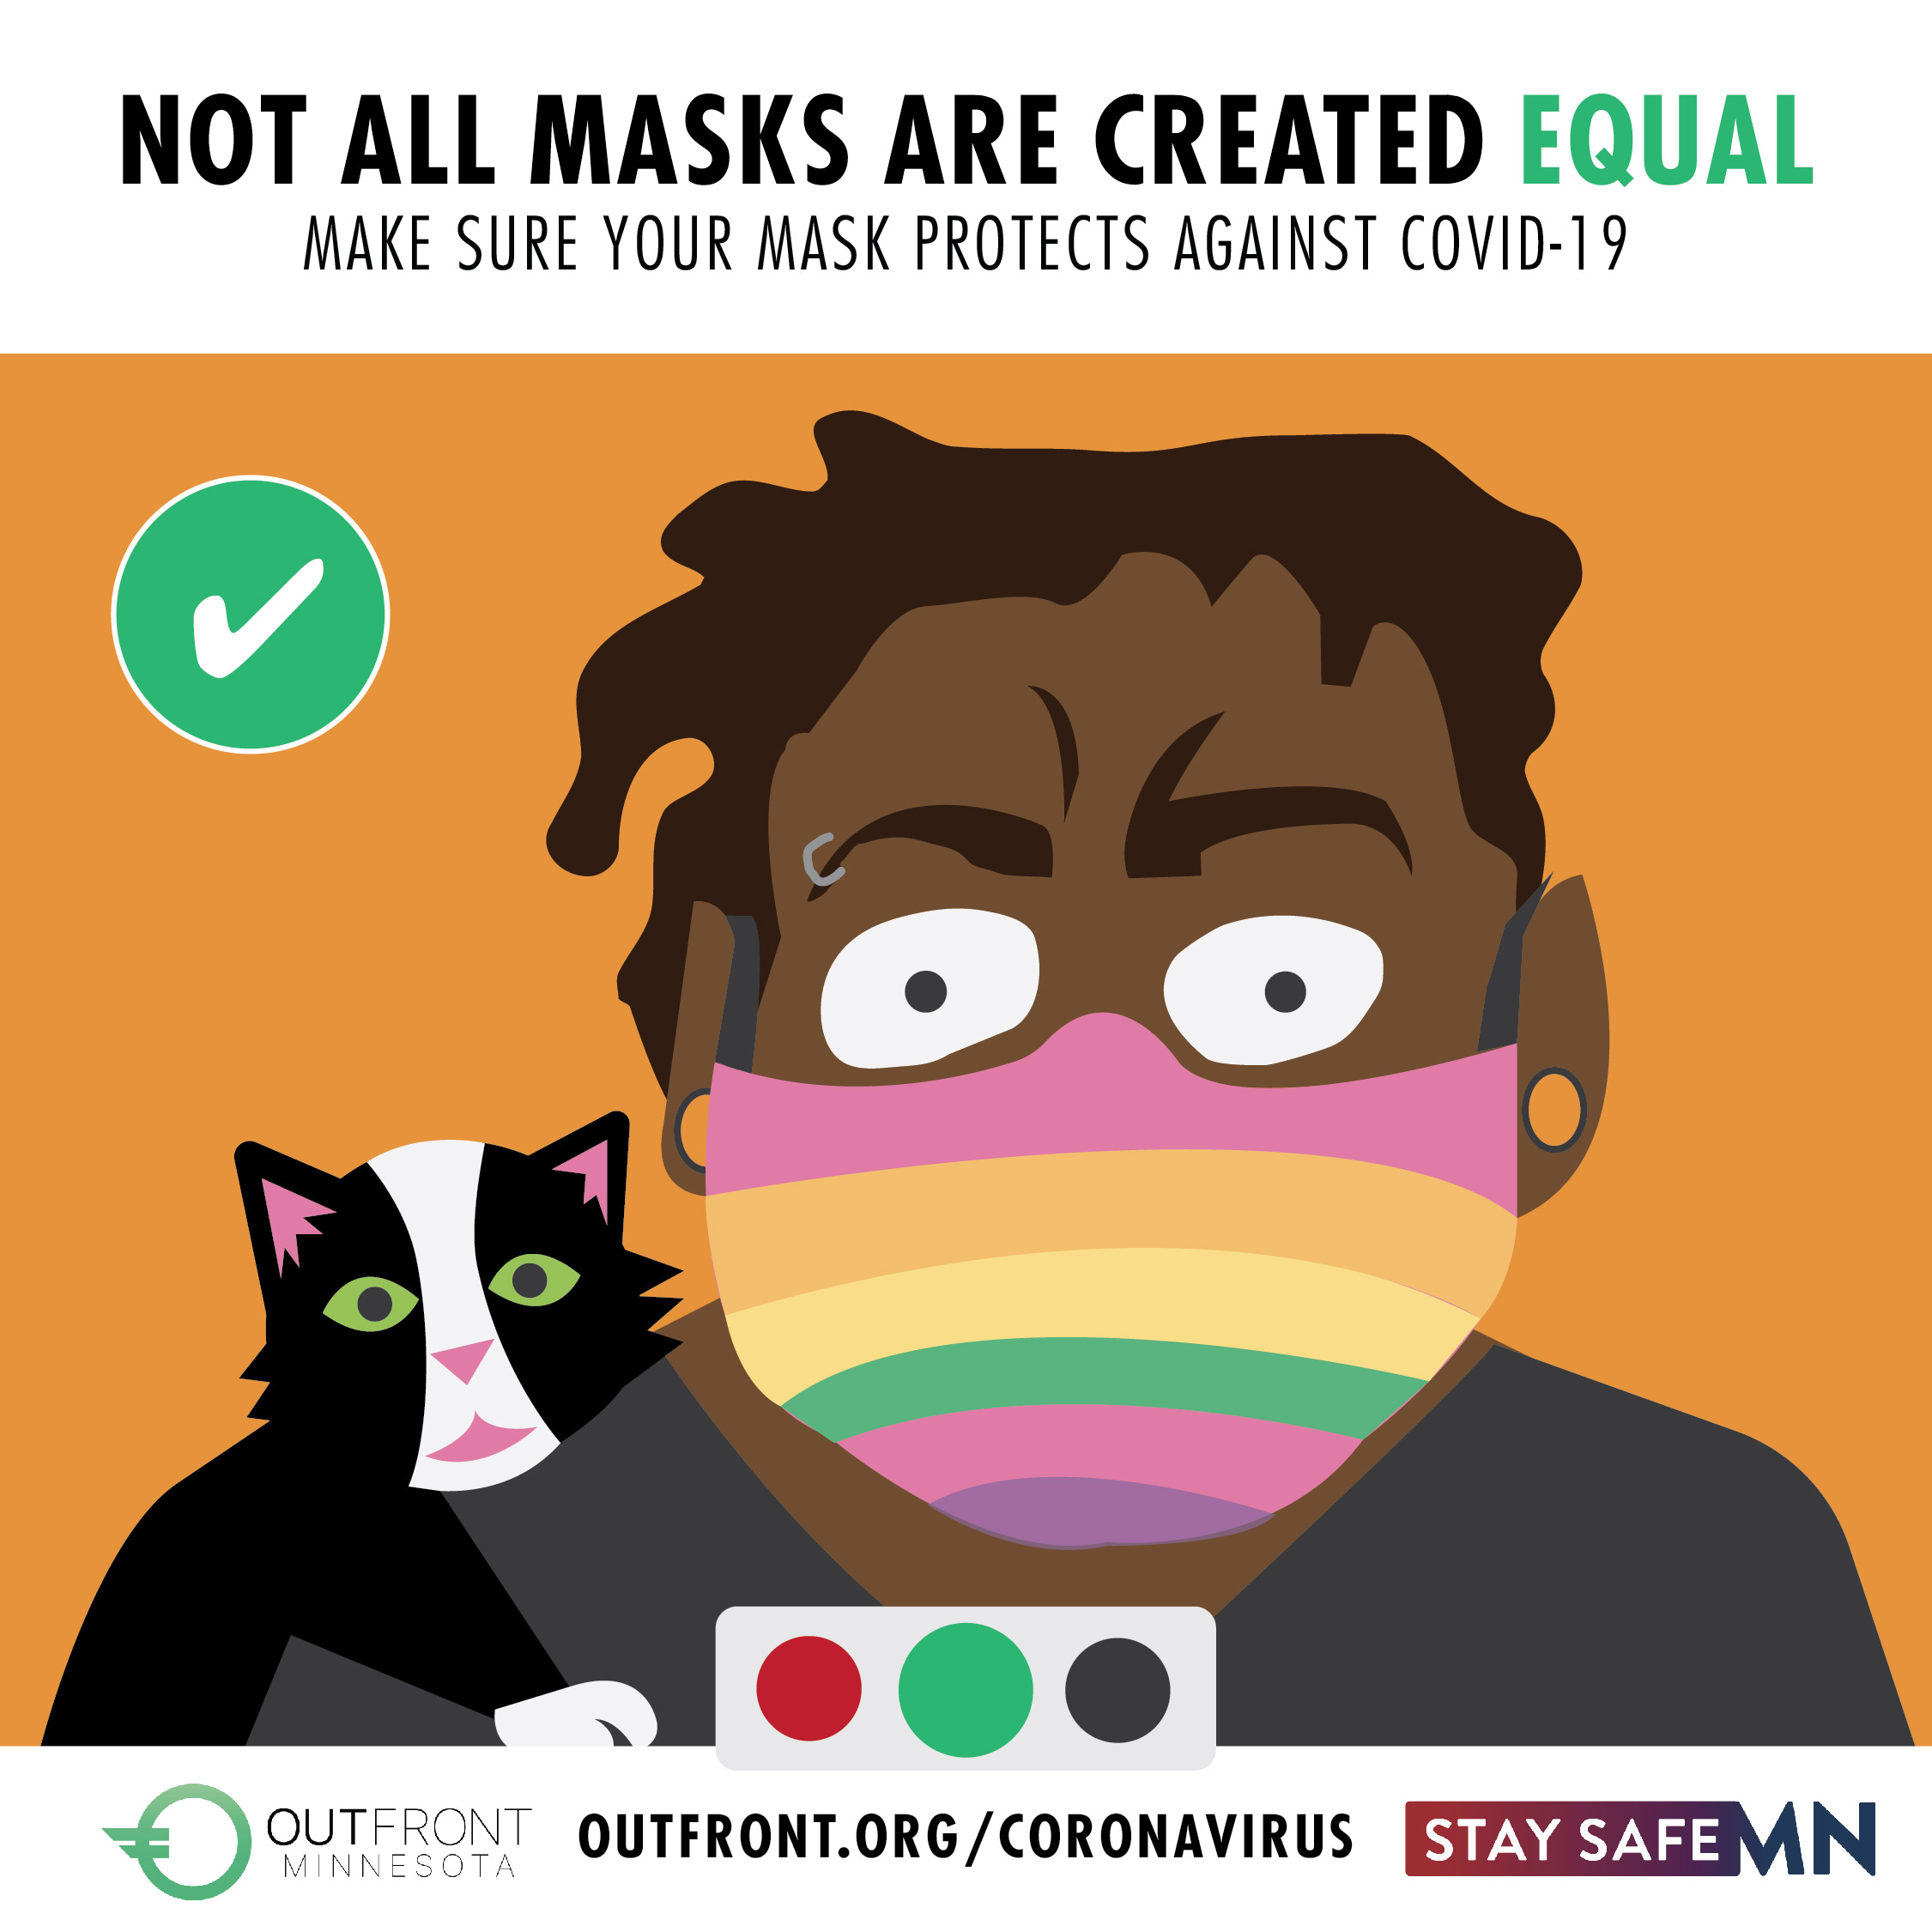 Make sure your mask protects against COVID-19 poster